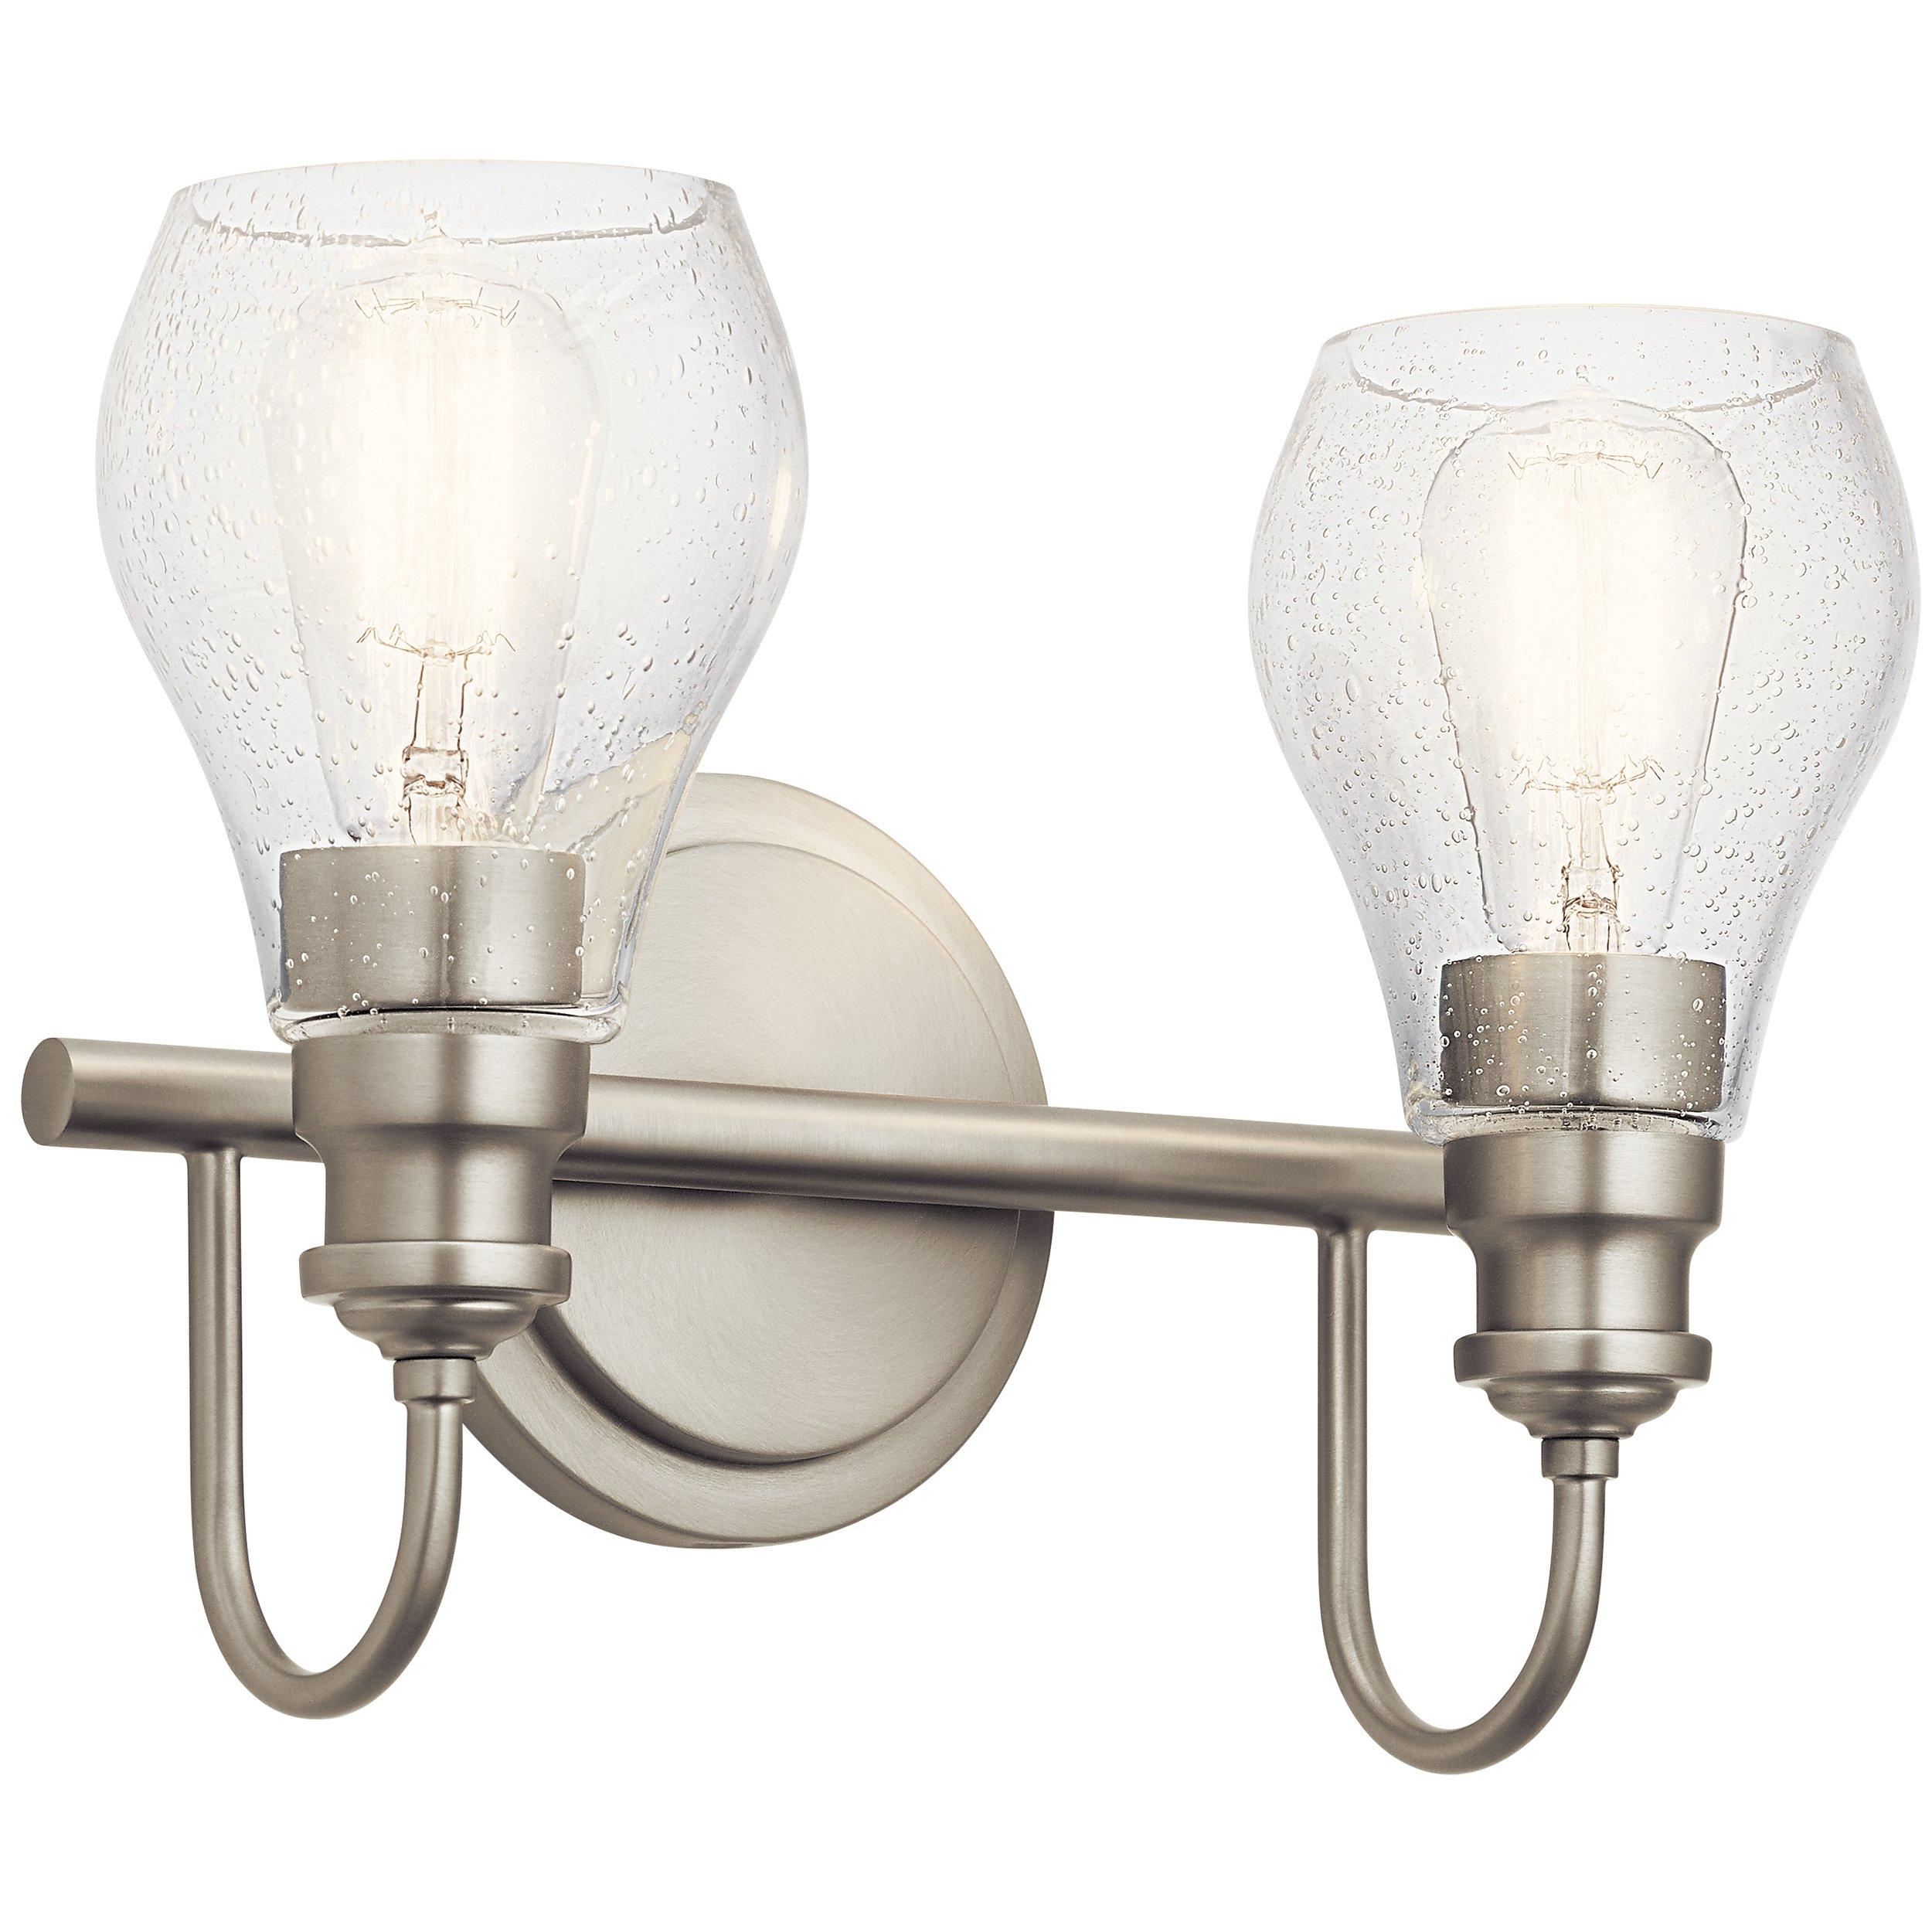 Greenbrier Brushed Nickel Double Sconce